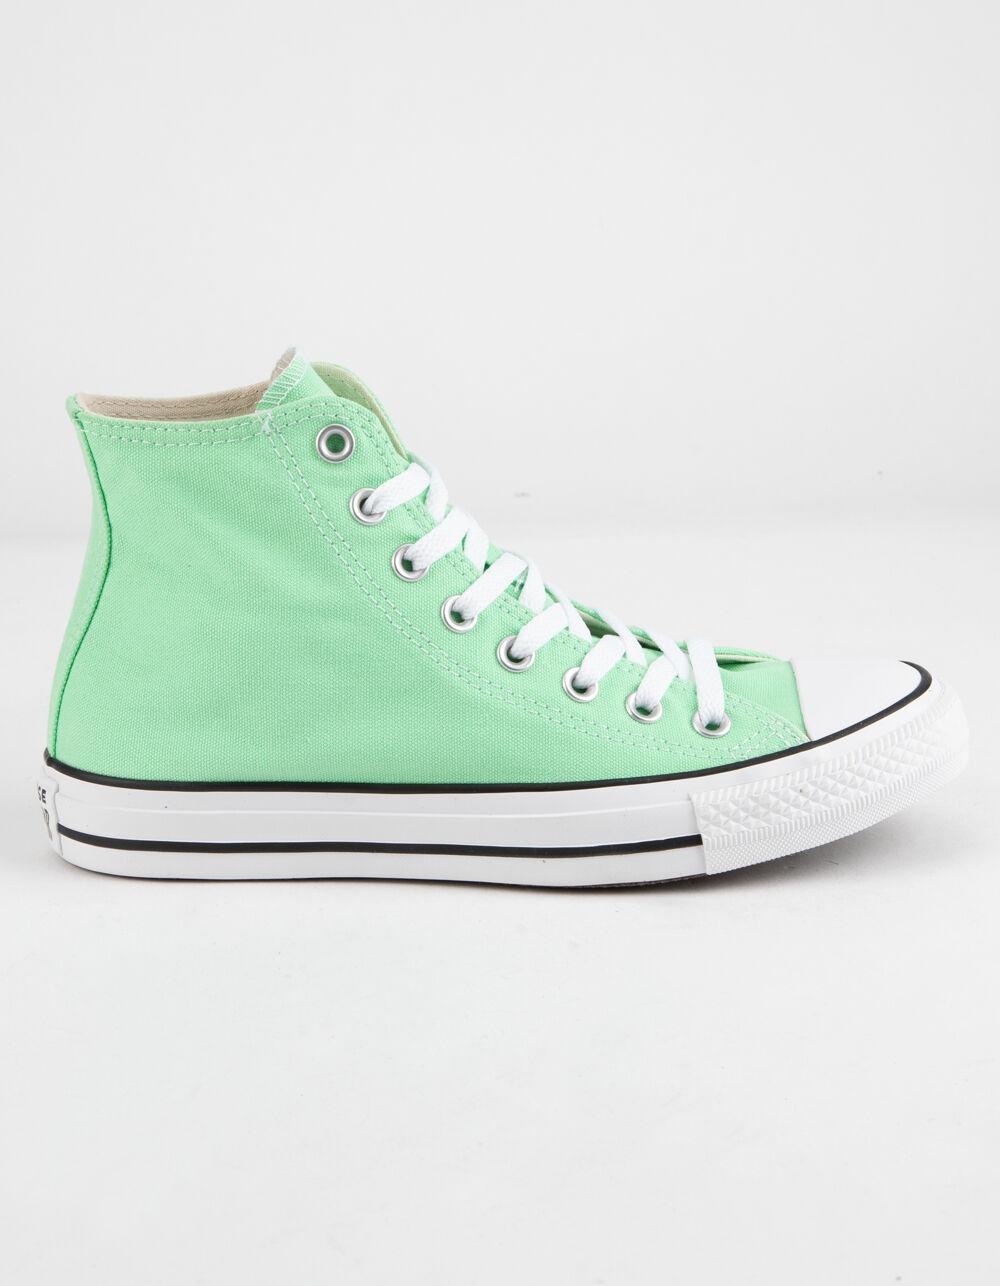 Converse Canvas Chuck Taylor All Star Light Aphid Green High Top Womens ...